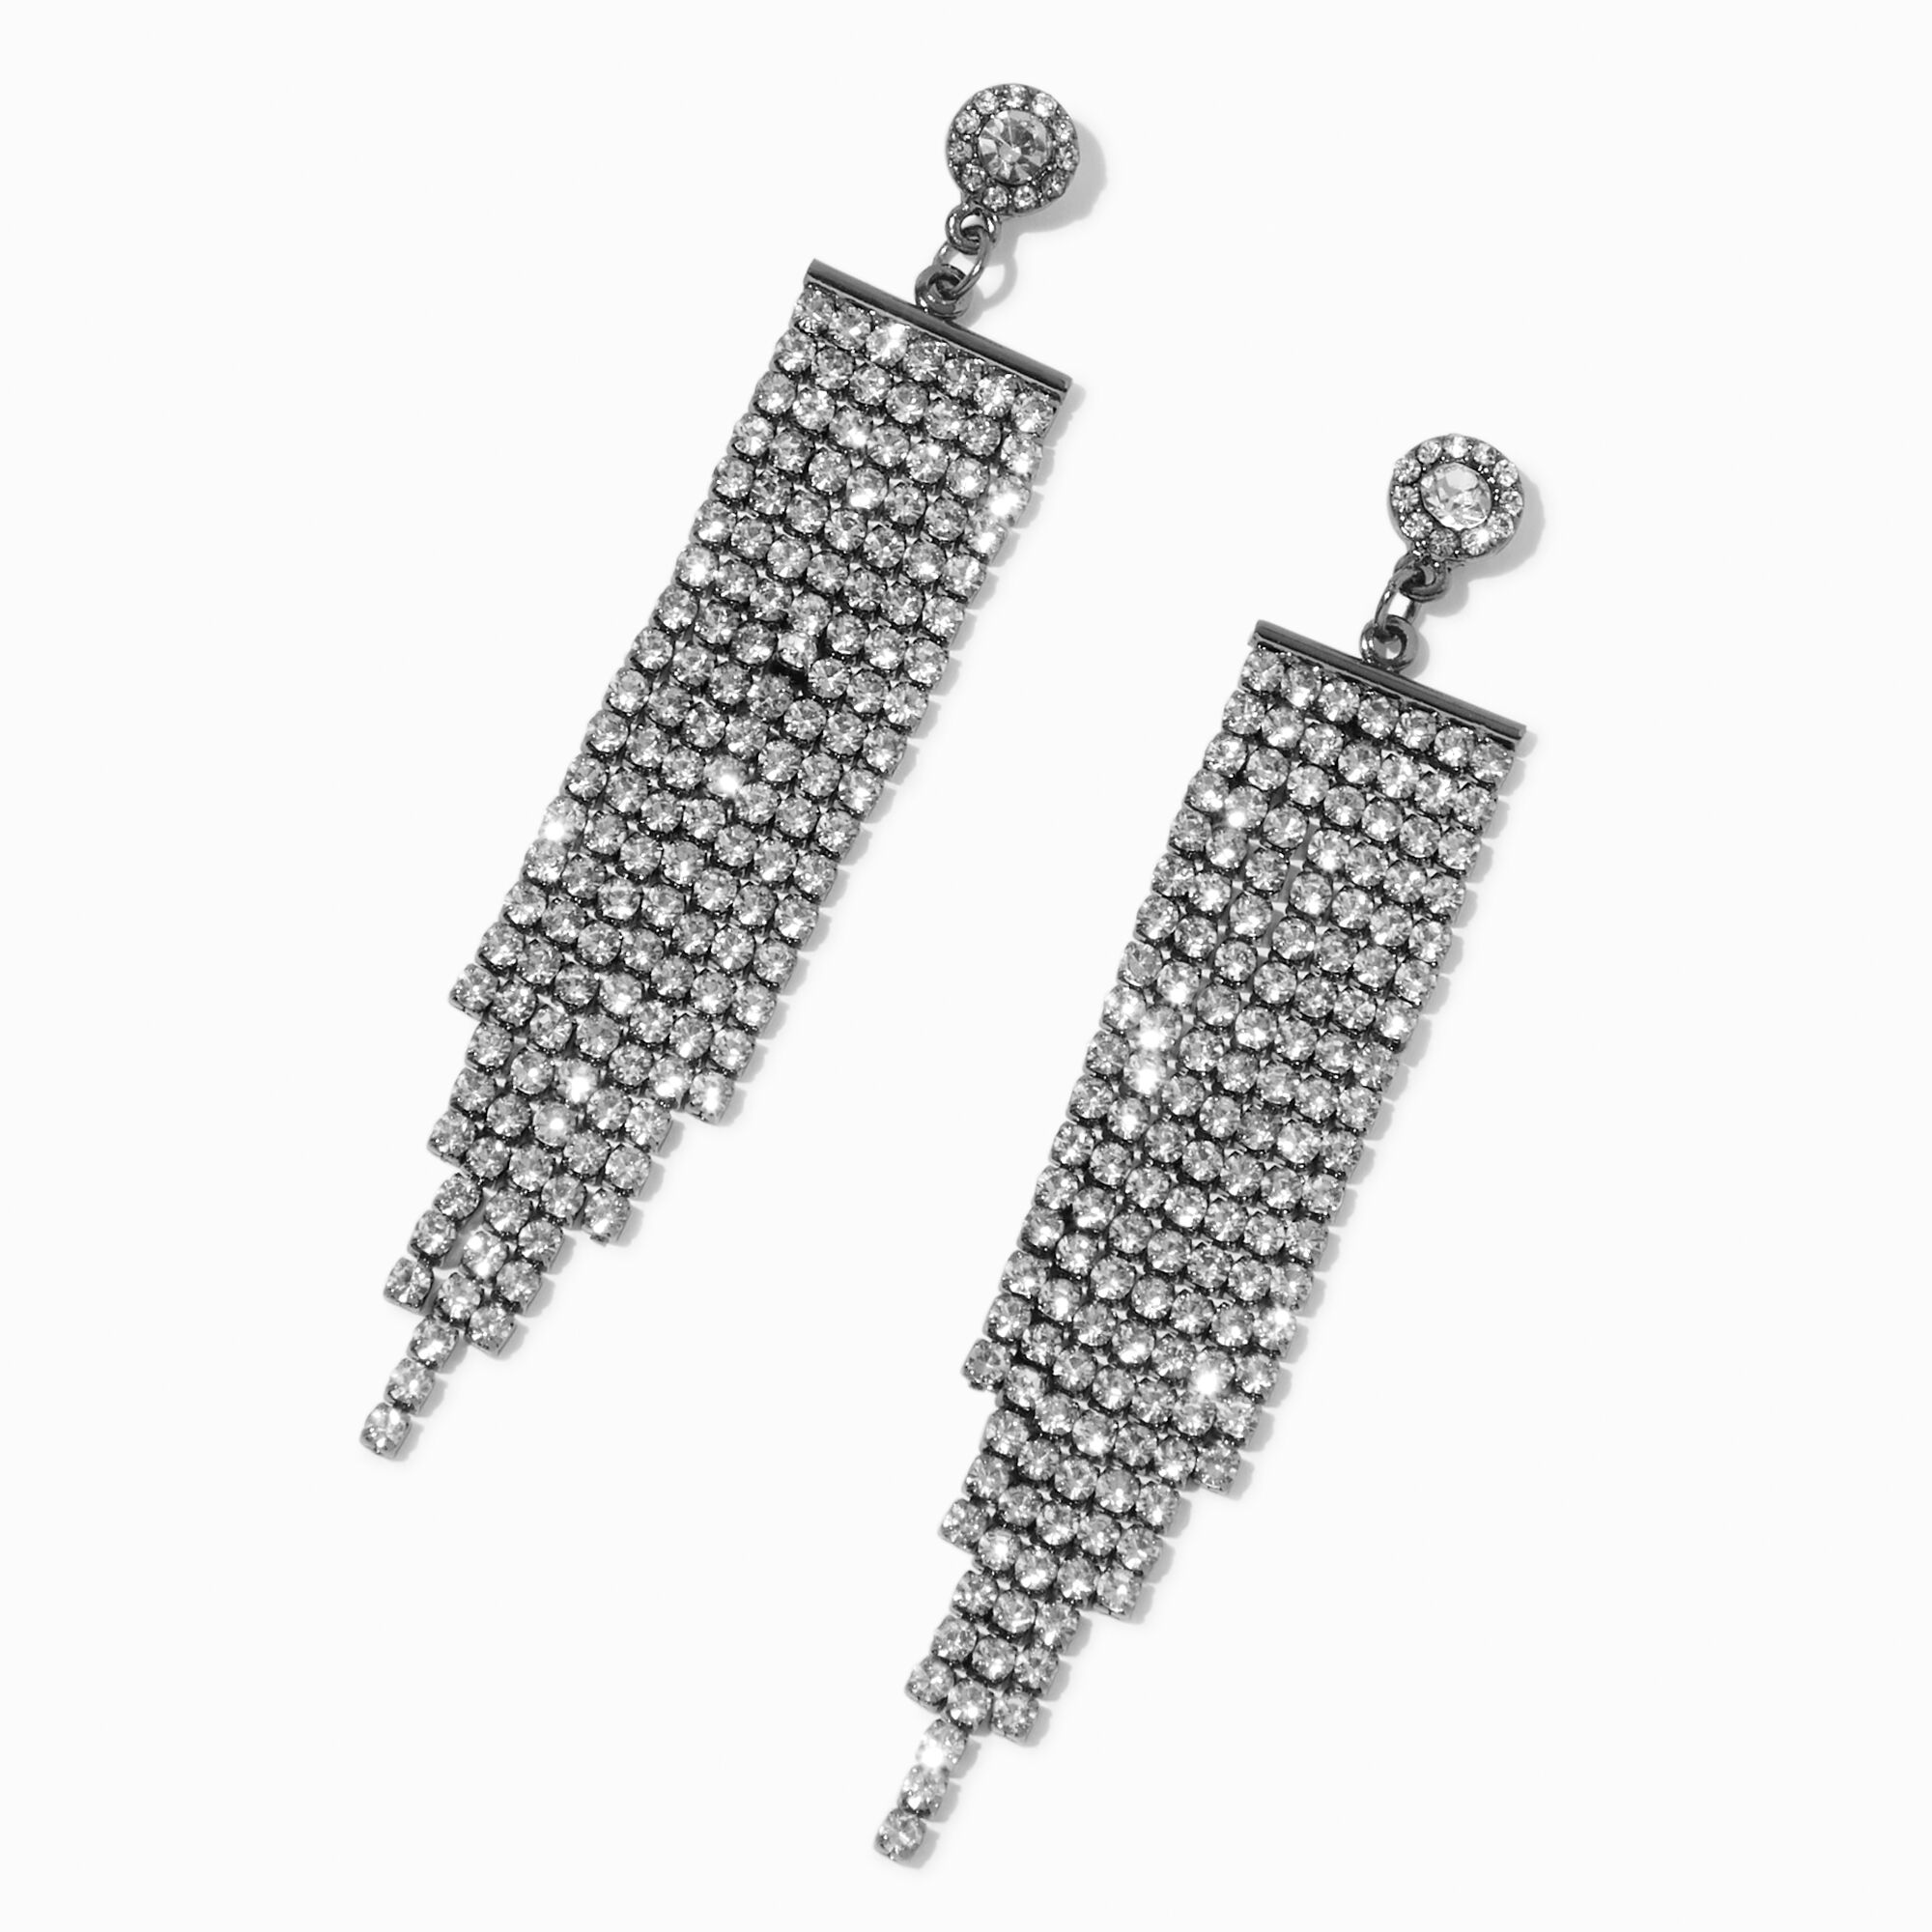 View Claires Crystal Tassel 3 Drop Earrings Silver information